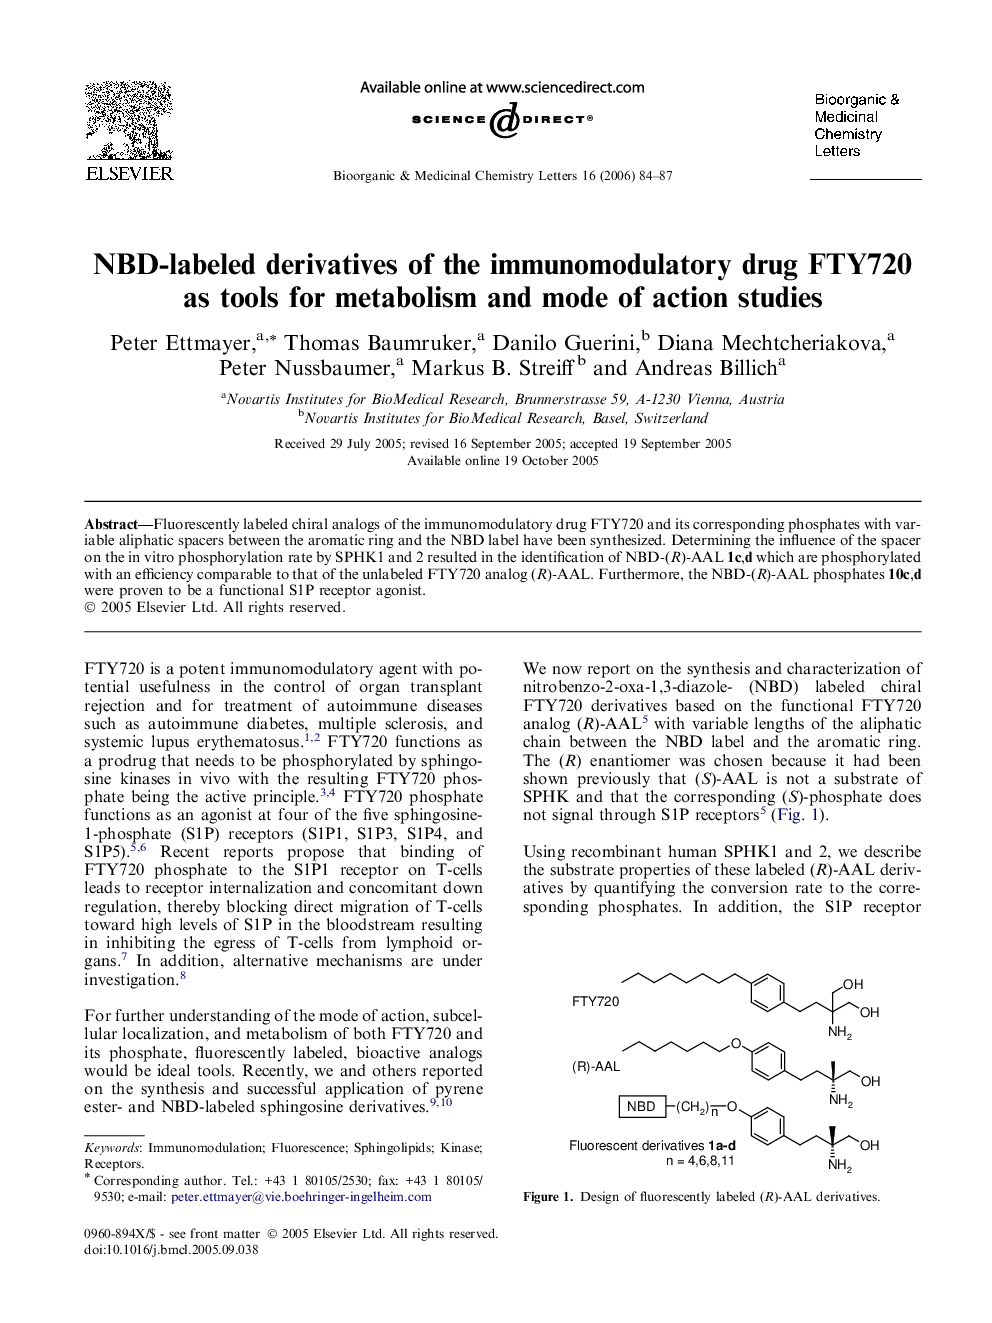 NBD-labeled derivatives of the immunomodulatory drug FTY720 as tools for metabolism and mode of action studies